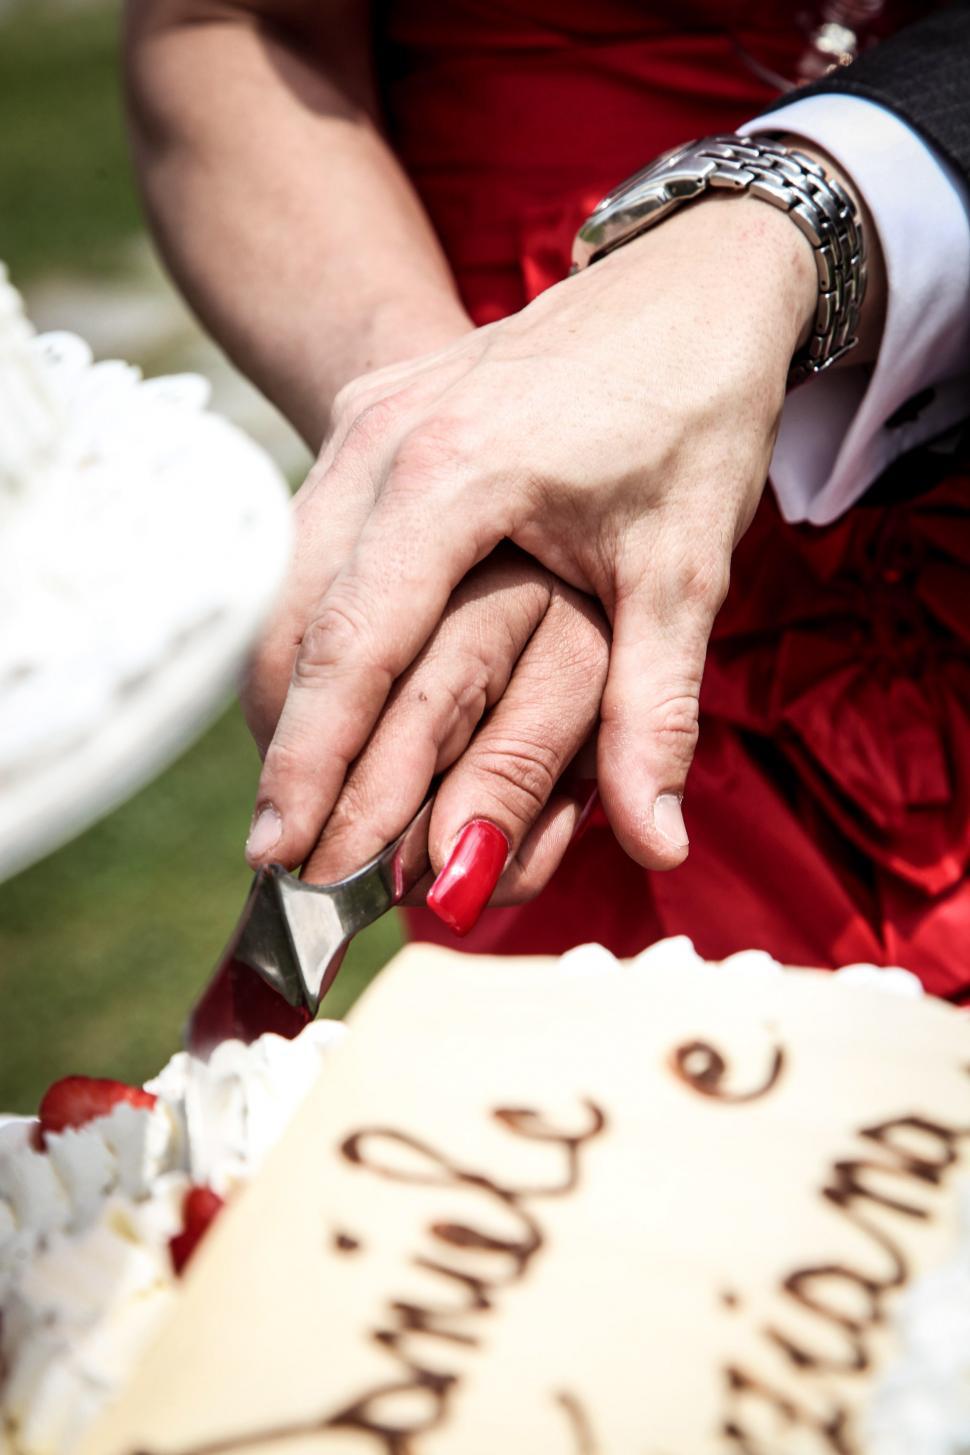 Free Image of Bride and groom and wedding cake 